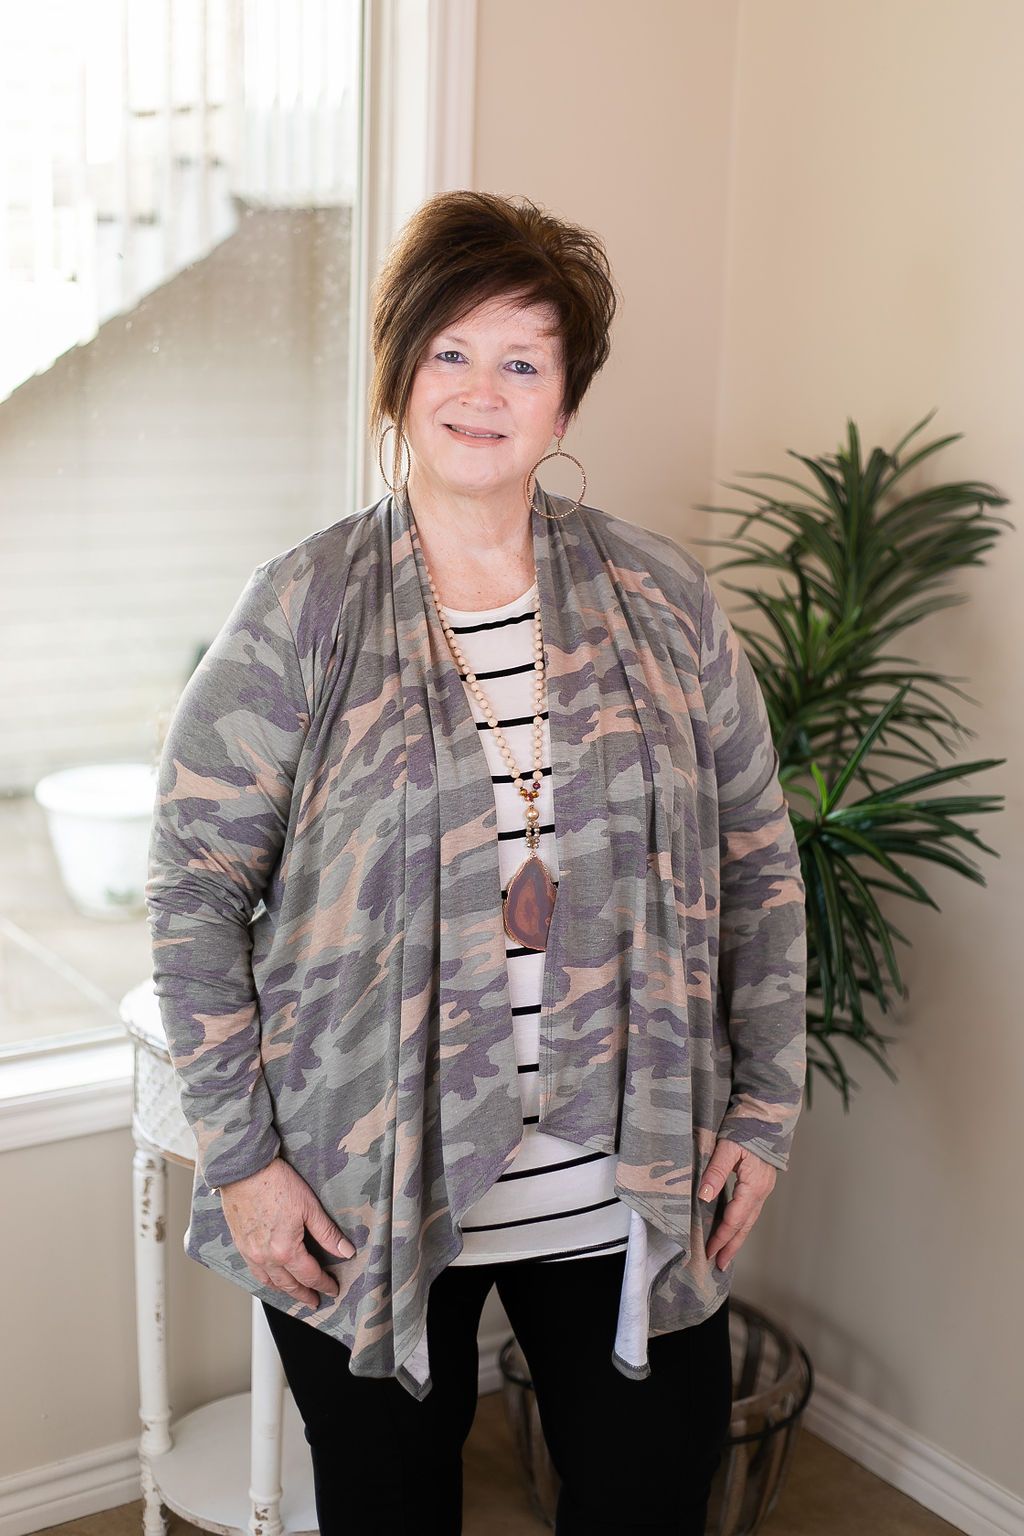 Under Cover Long Sleeve Cardigan in Camouflage waterfall front